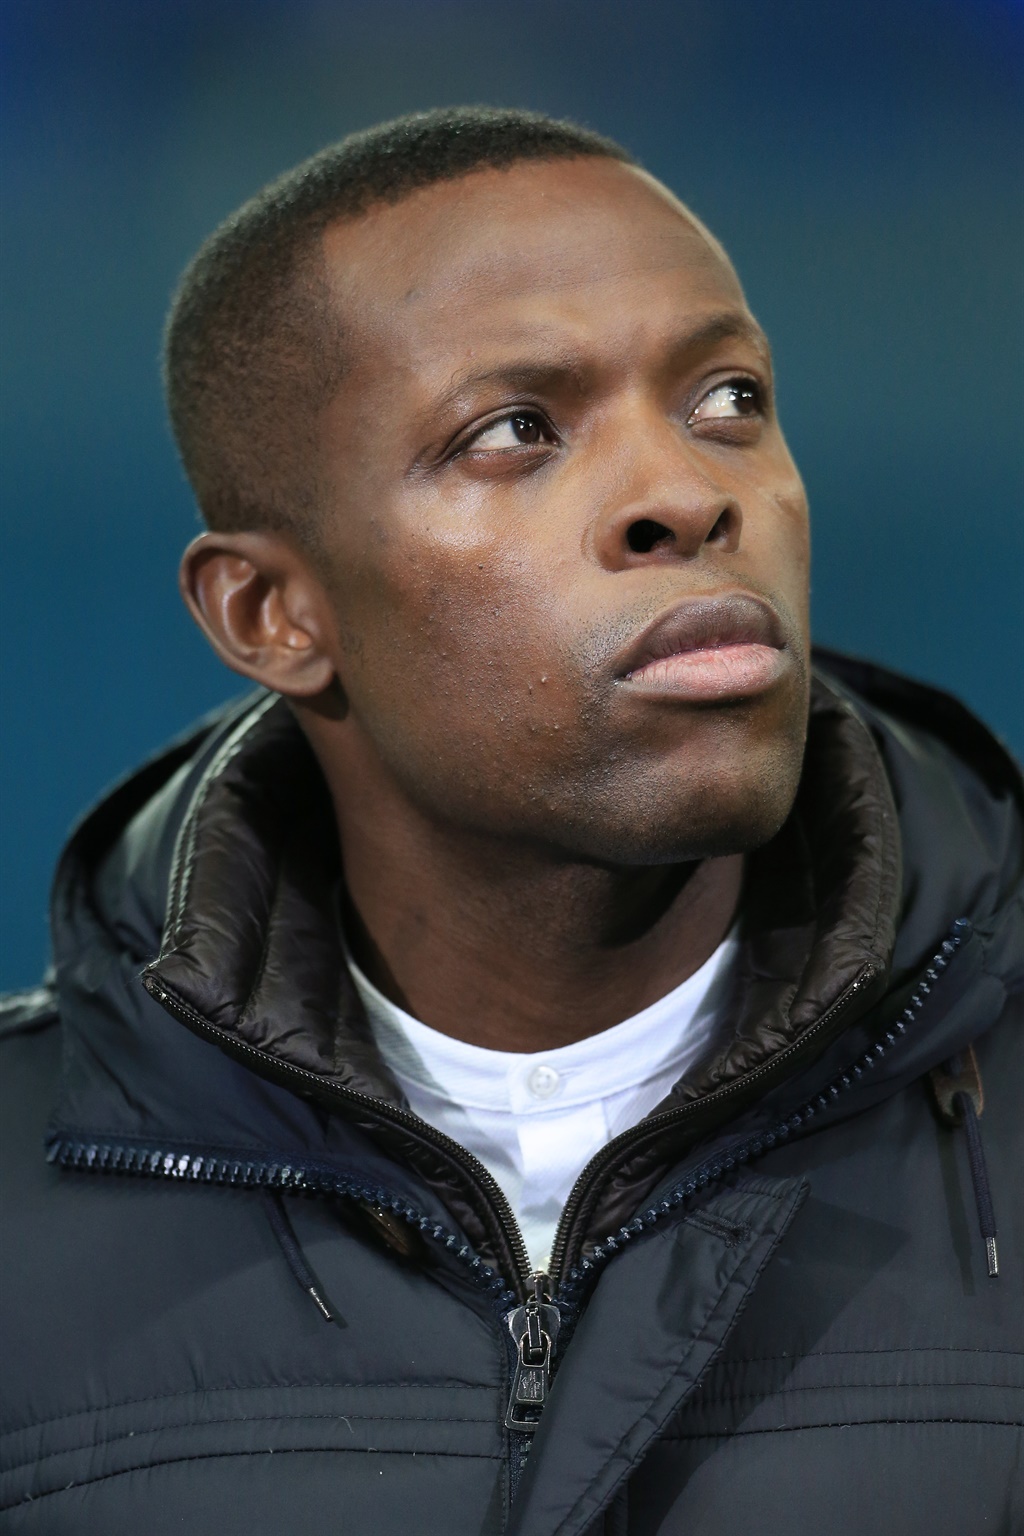 Former Manchester City defender Nedum Onuoha says he does not feel “100% safe” in the US. Picture: Simon Stacpoole/Offside/Offside via Getty Images)